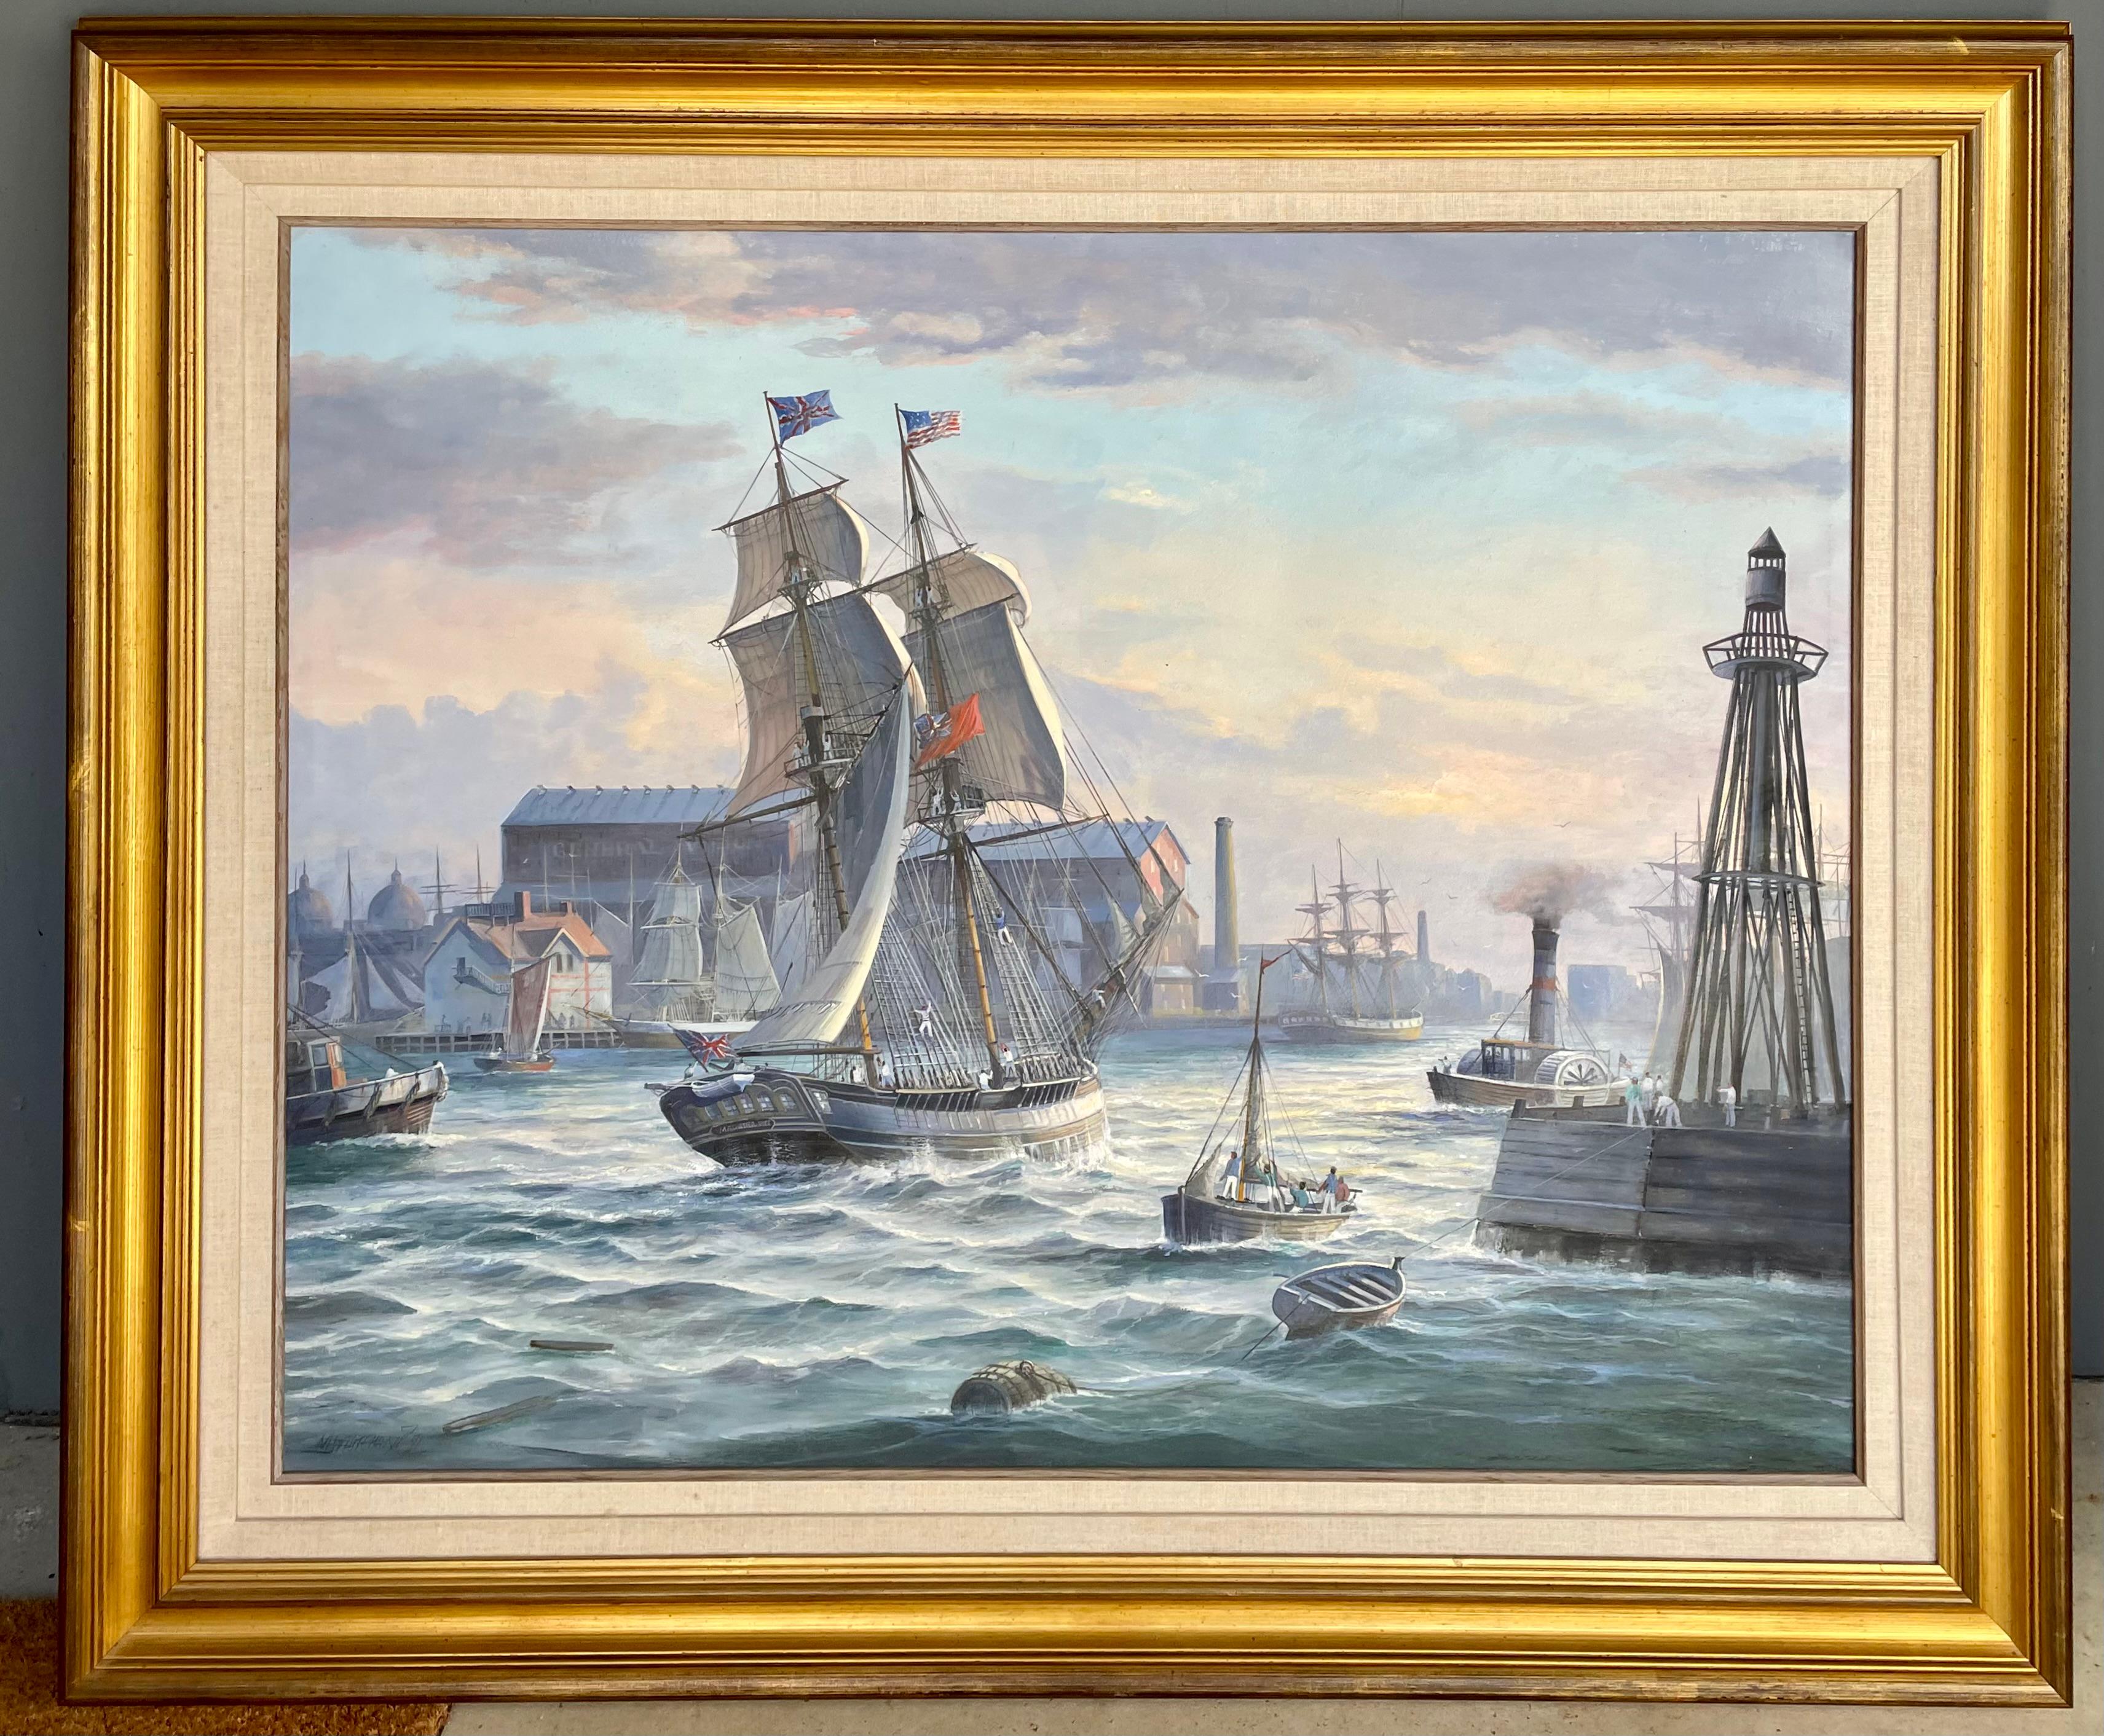 Oil on canvas, signed lower left.

b. 1941, British
Born in the East coastal town of Bridlington in Yorkshire, England, and largely self-taught, Michael Whitehand is one of England’s top maritime artists. He has successfully exhibited his work